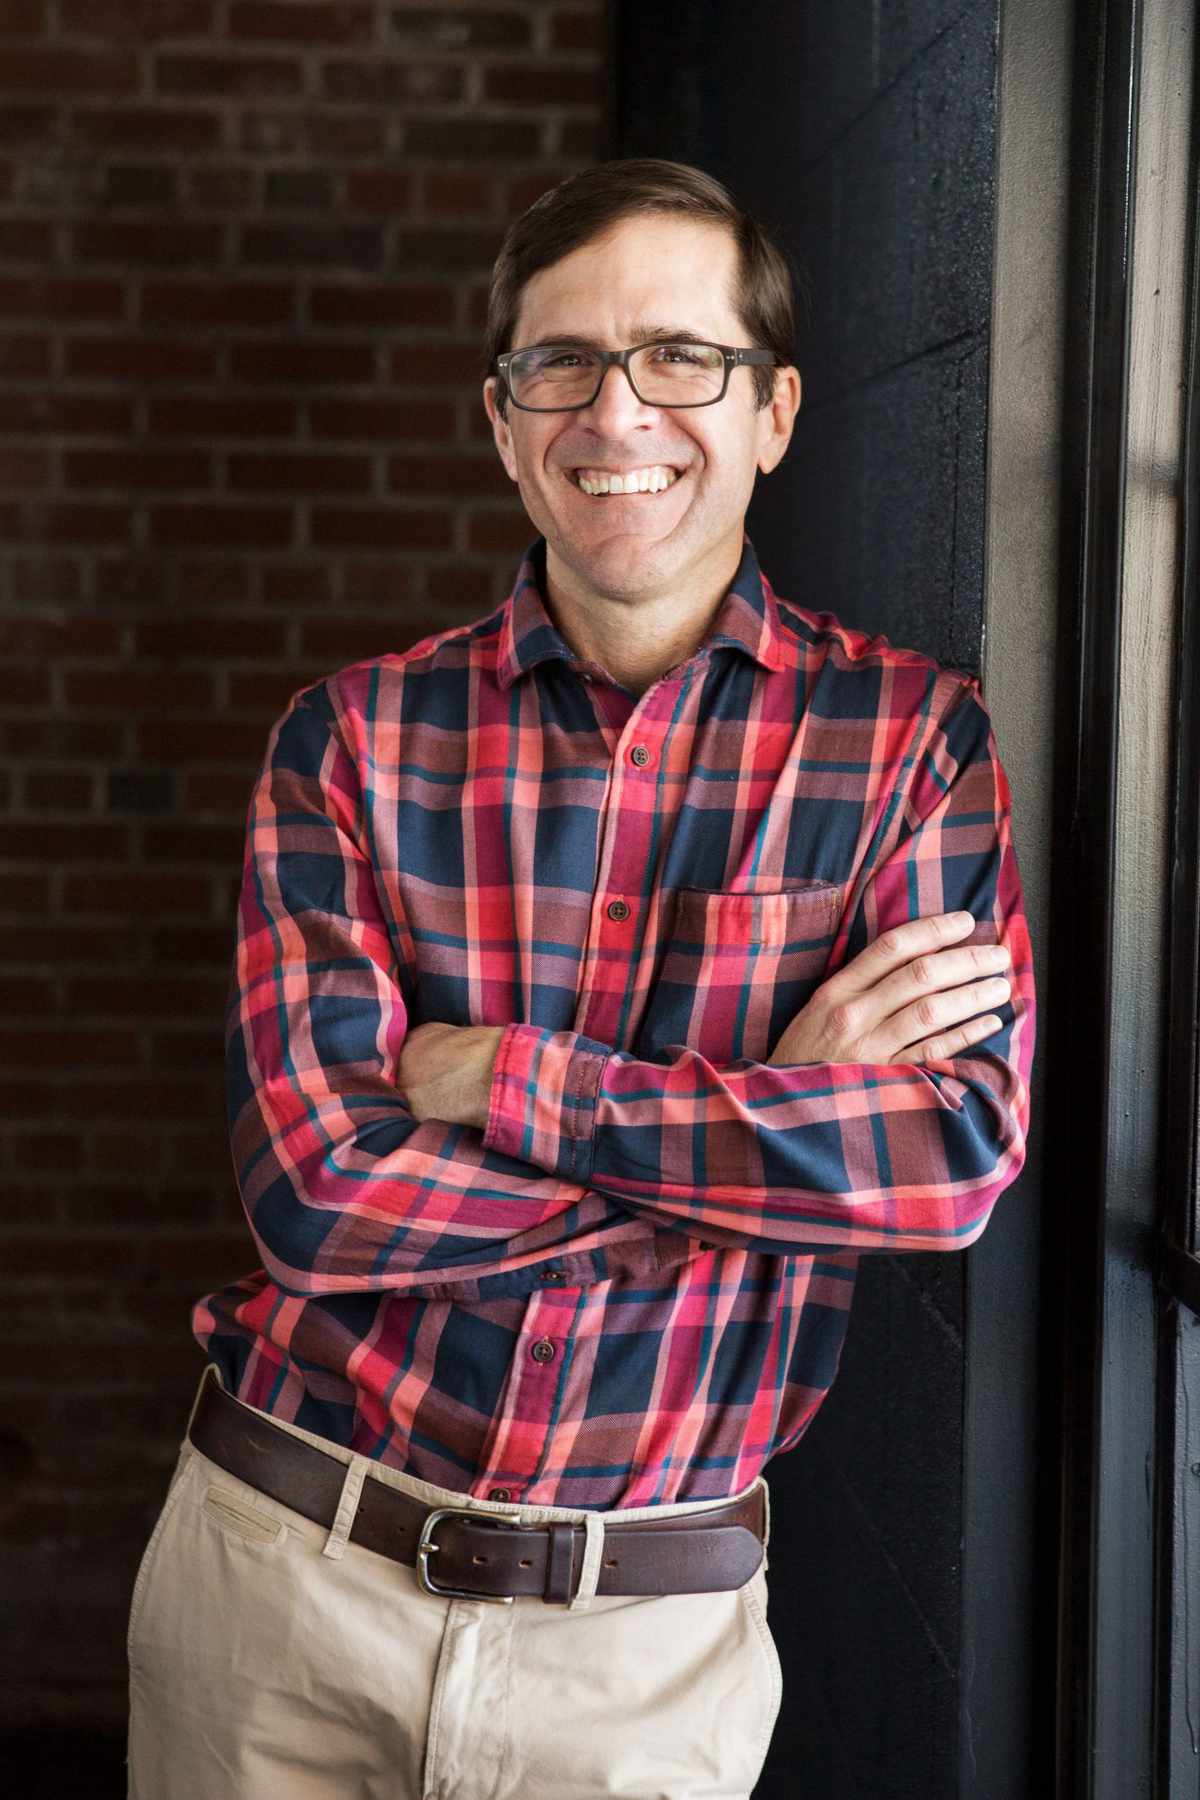 Sid Evans, Editor in Chief of Southern Living